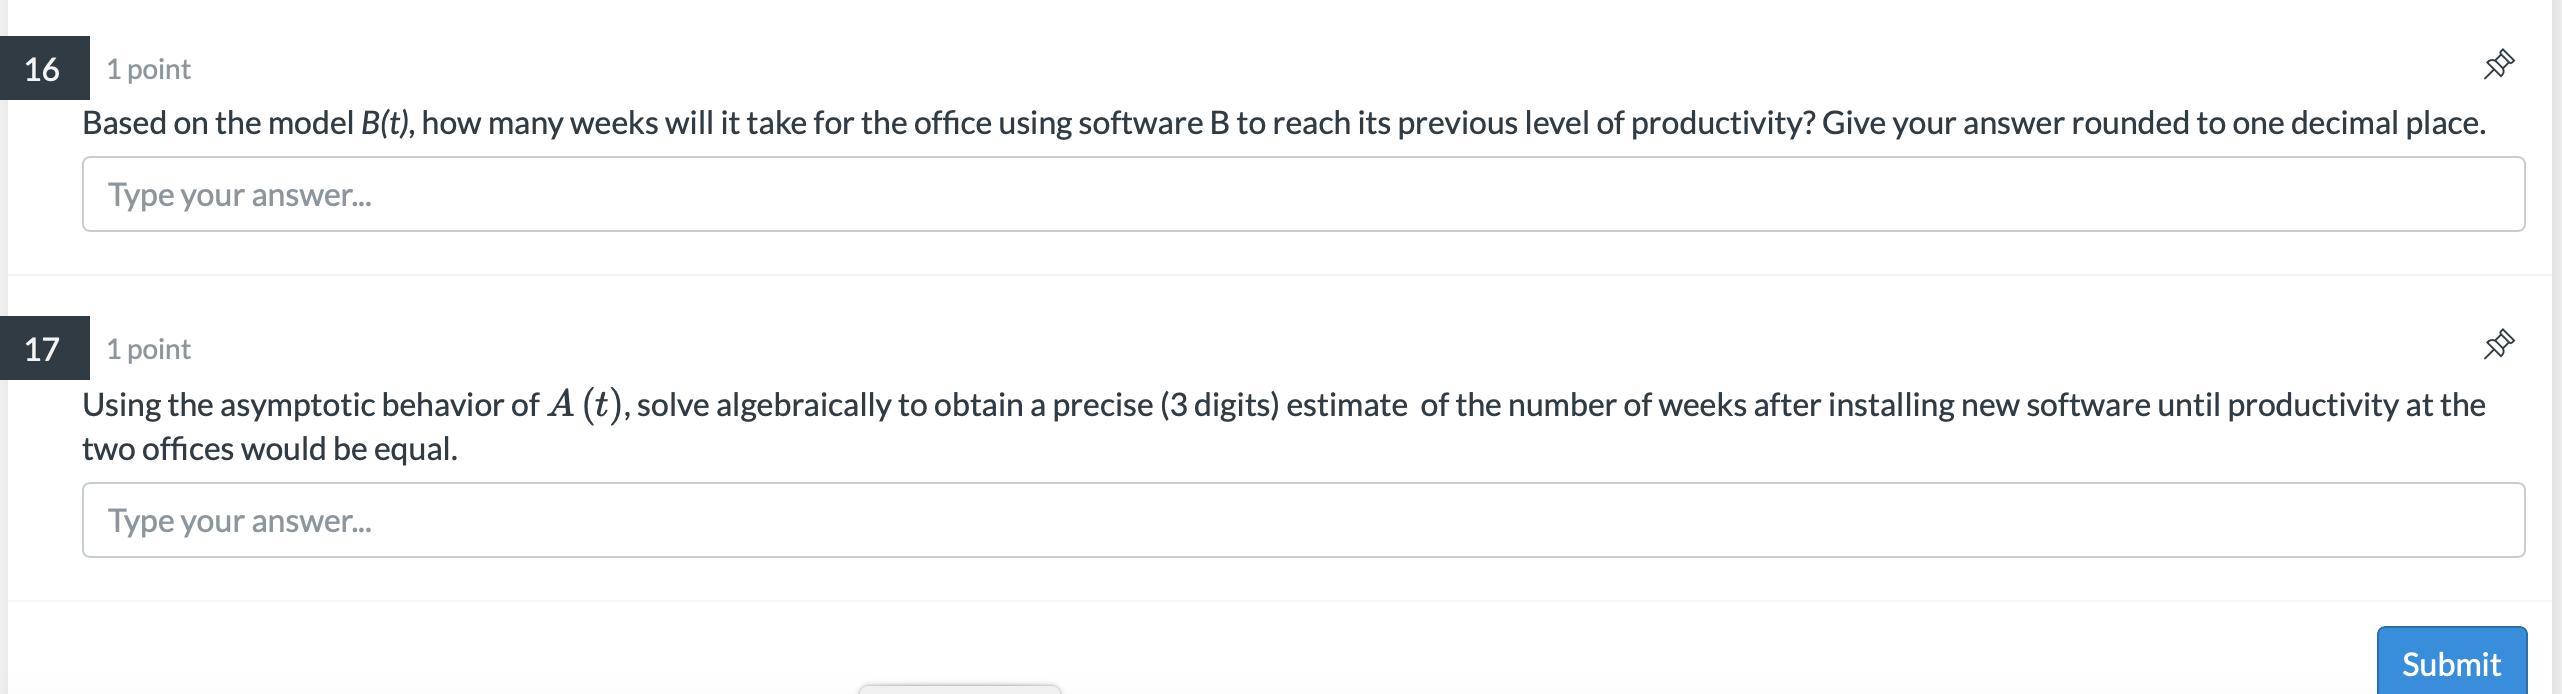 16 Do 1 point Based on the model B(t), how many weeks will it take for the office using software B to reach its previous leve